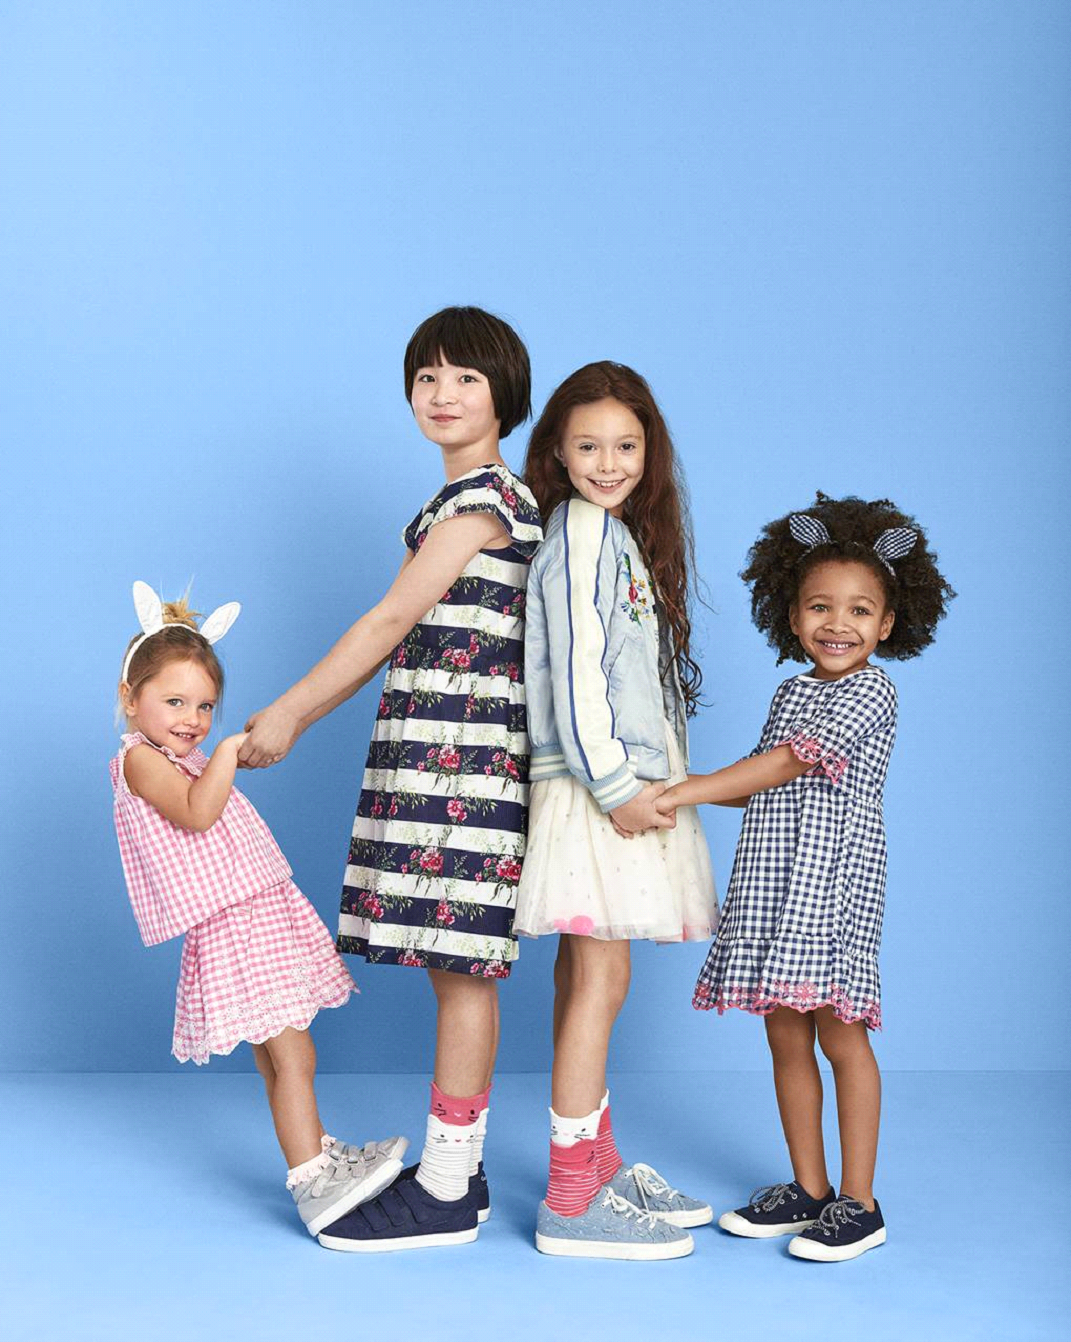 Children's Fashion Trends for Girls and Boys